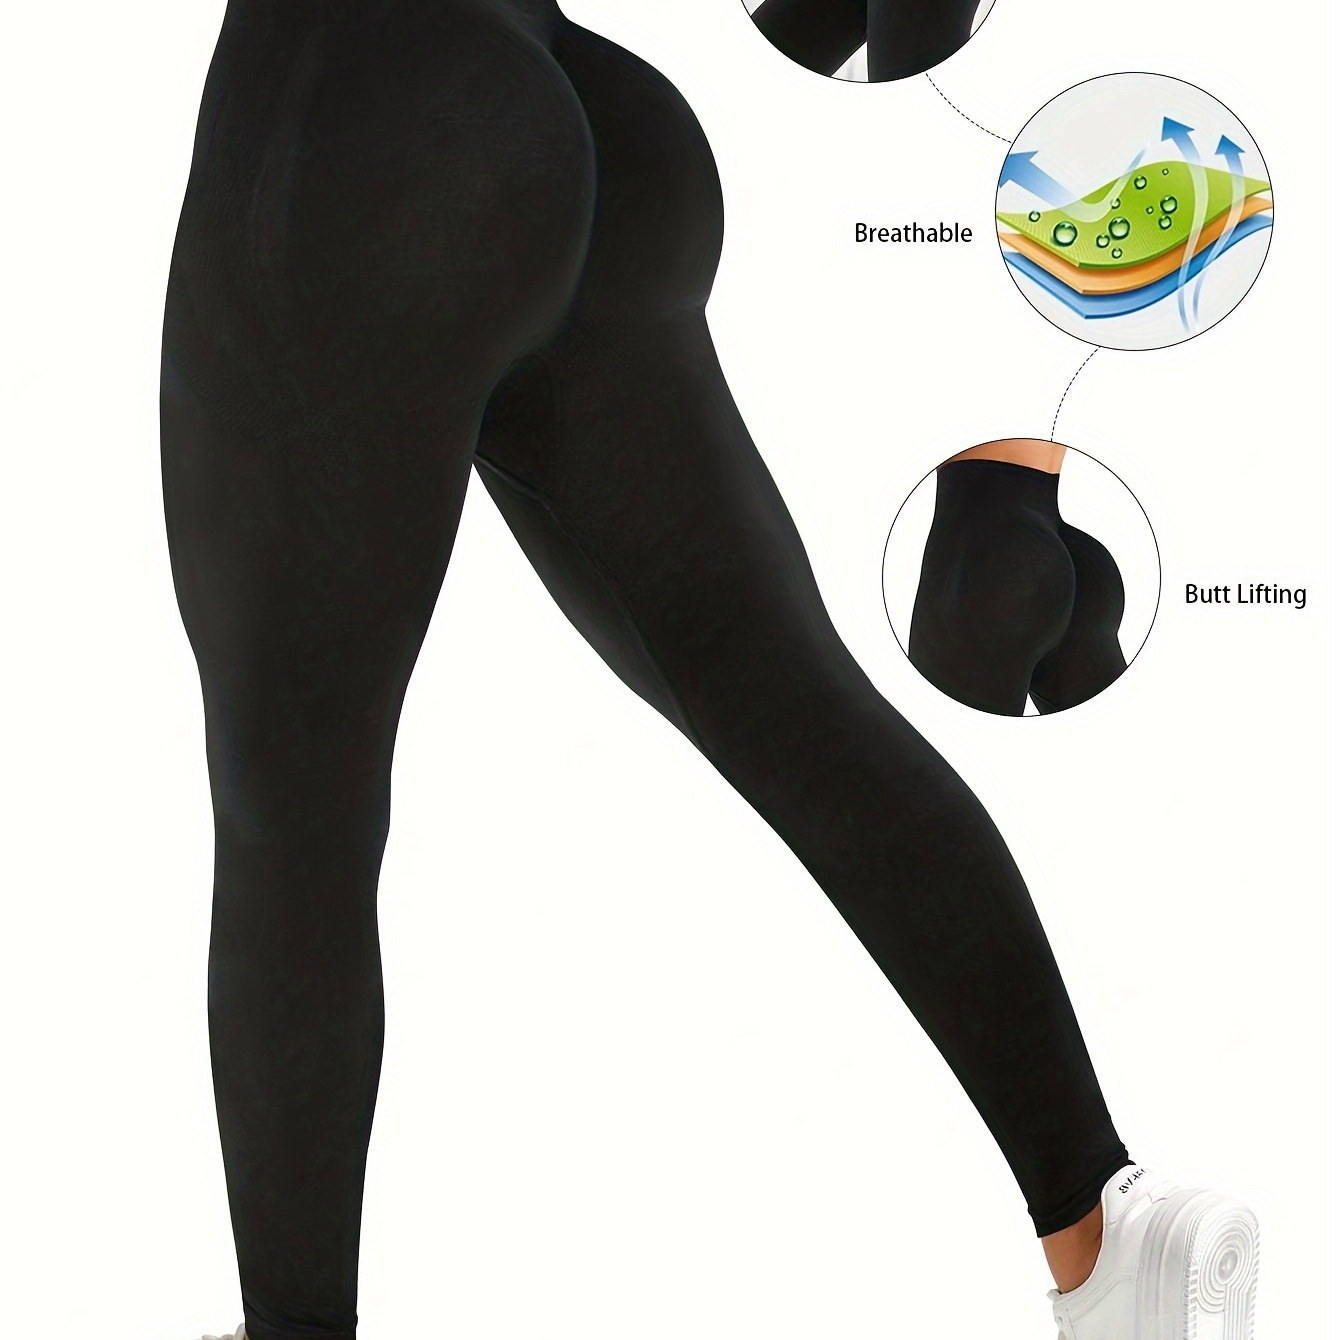 

Seamless High-waist Butt Lifting Yoga Leggings For Women, Solid Color, Breathable Gym Tights, Stretchy Knit Fabric